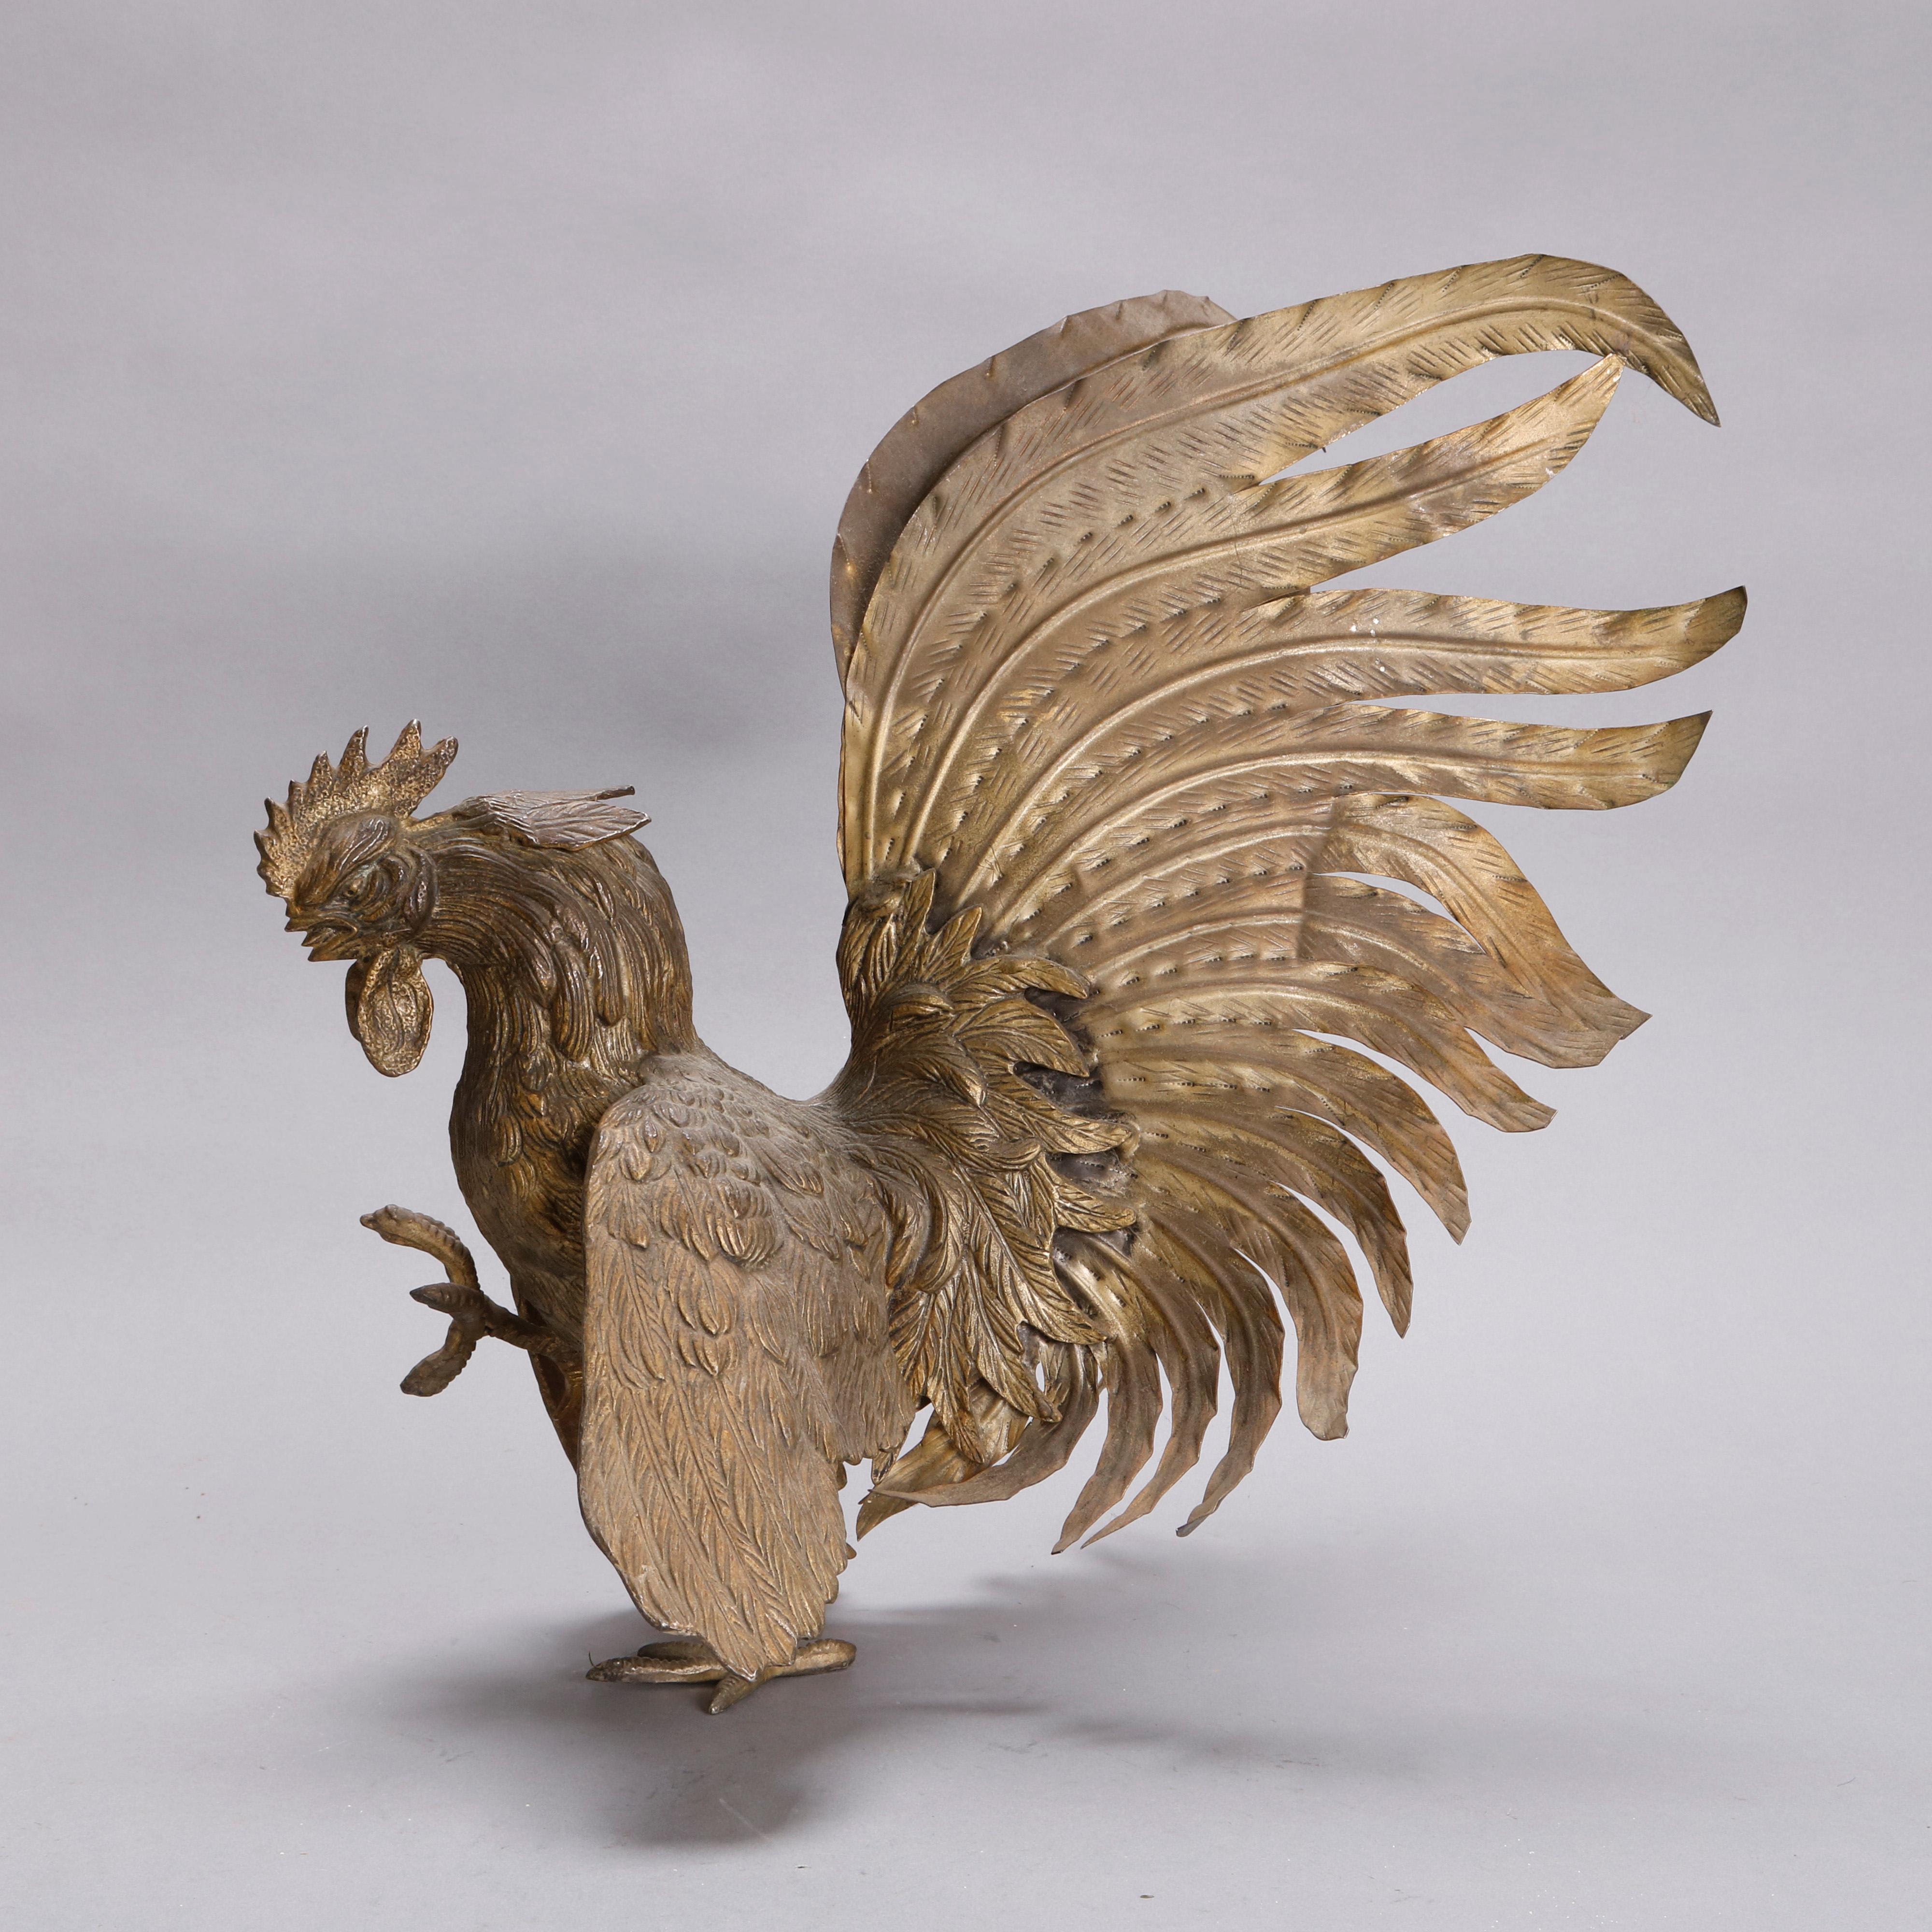 A vintage pair of French figural sculptures offer bronze metal construction and depict roosters in cock fighting posturing, circa 1930

***DELIVERY NOTICE – Due to COVID-19 we are employing NO-CONTACT PRACTICES in the transfer of purchased items. 